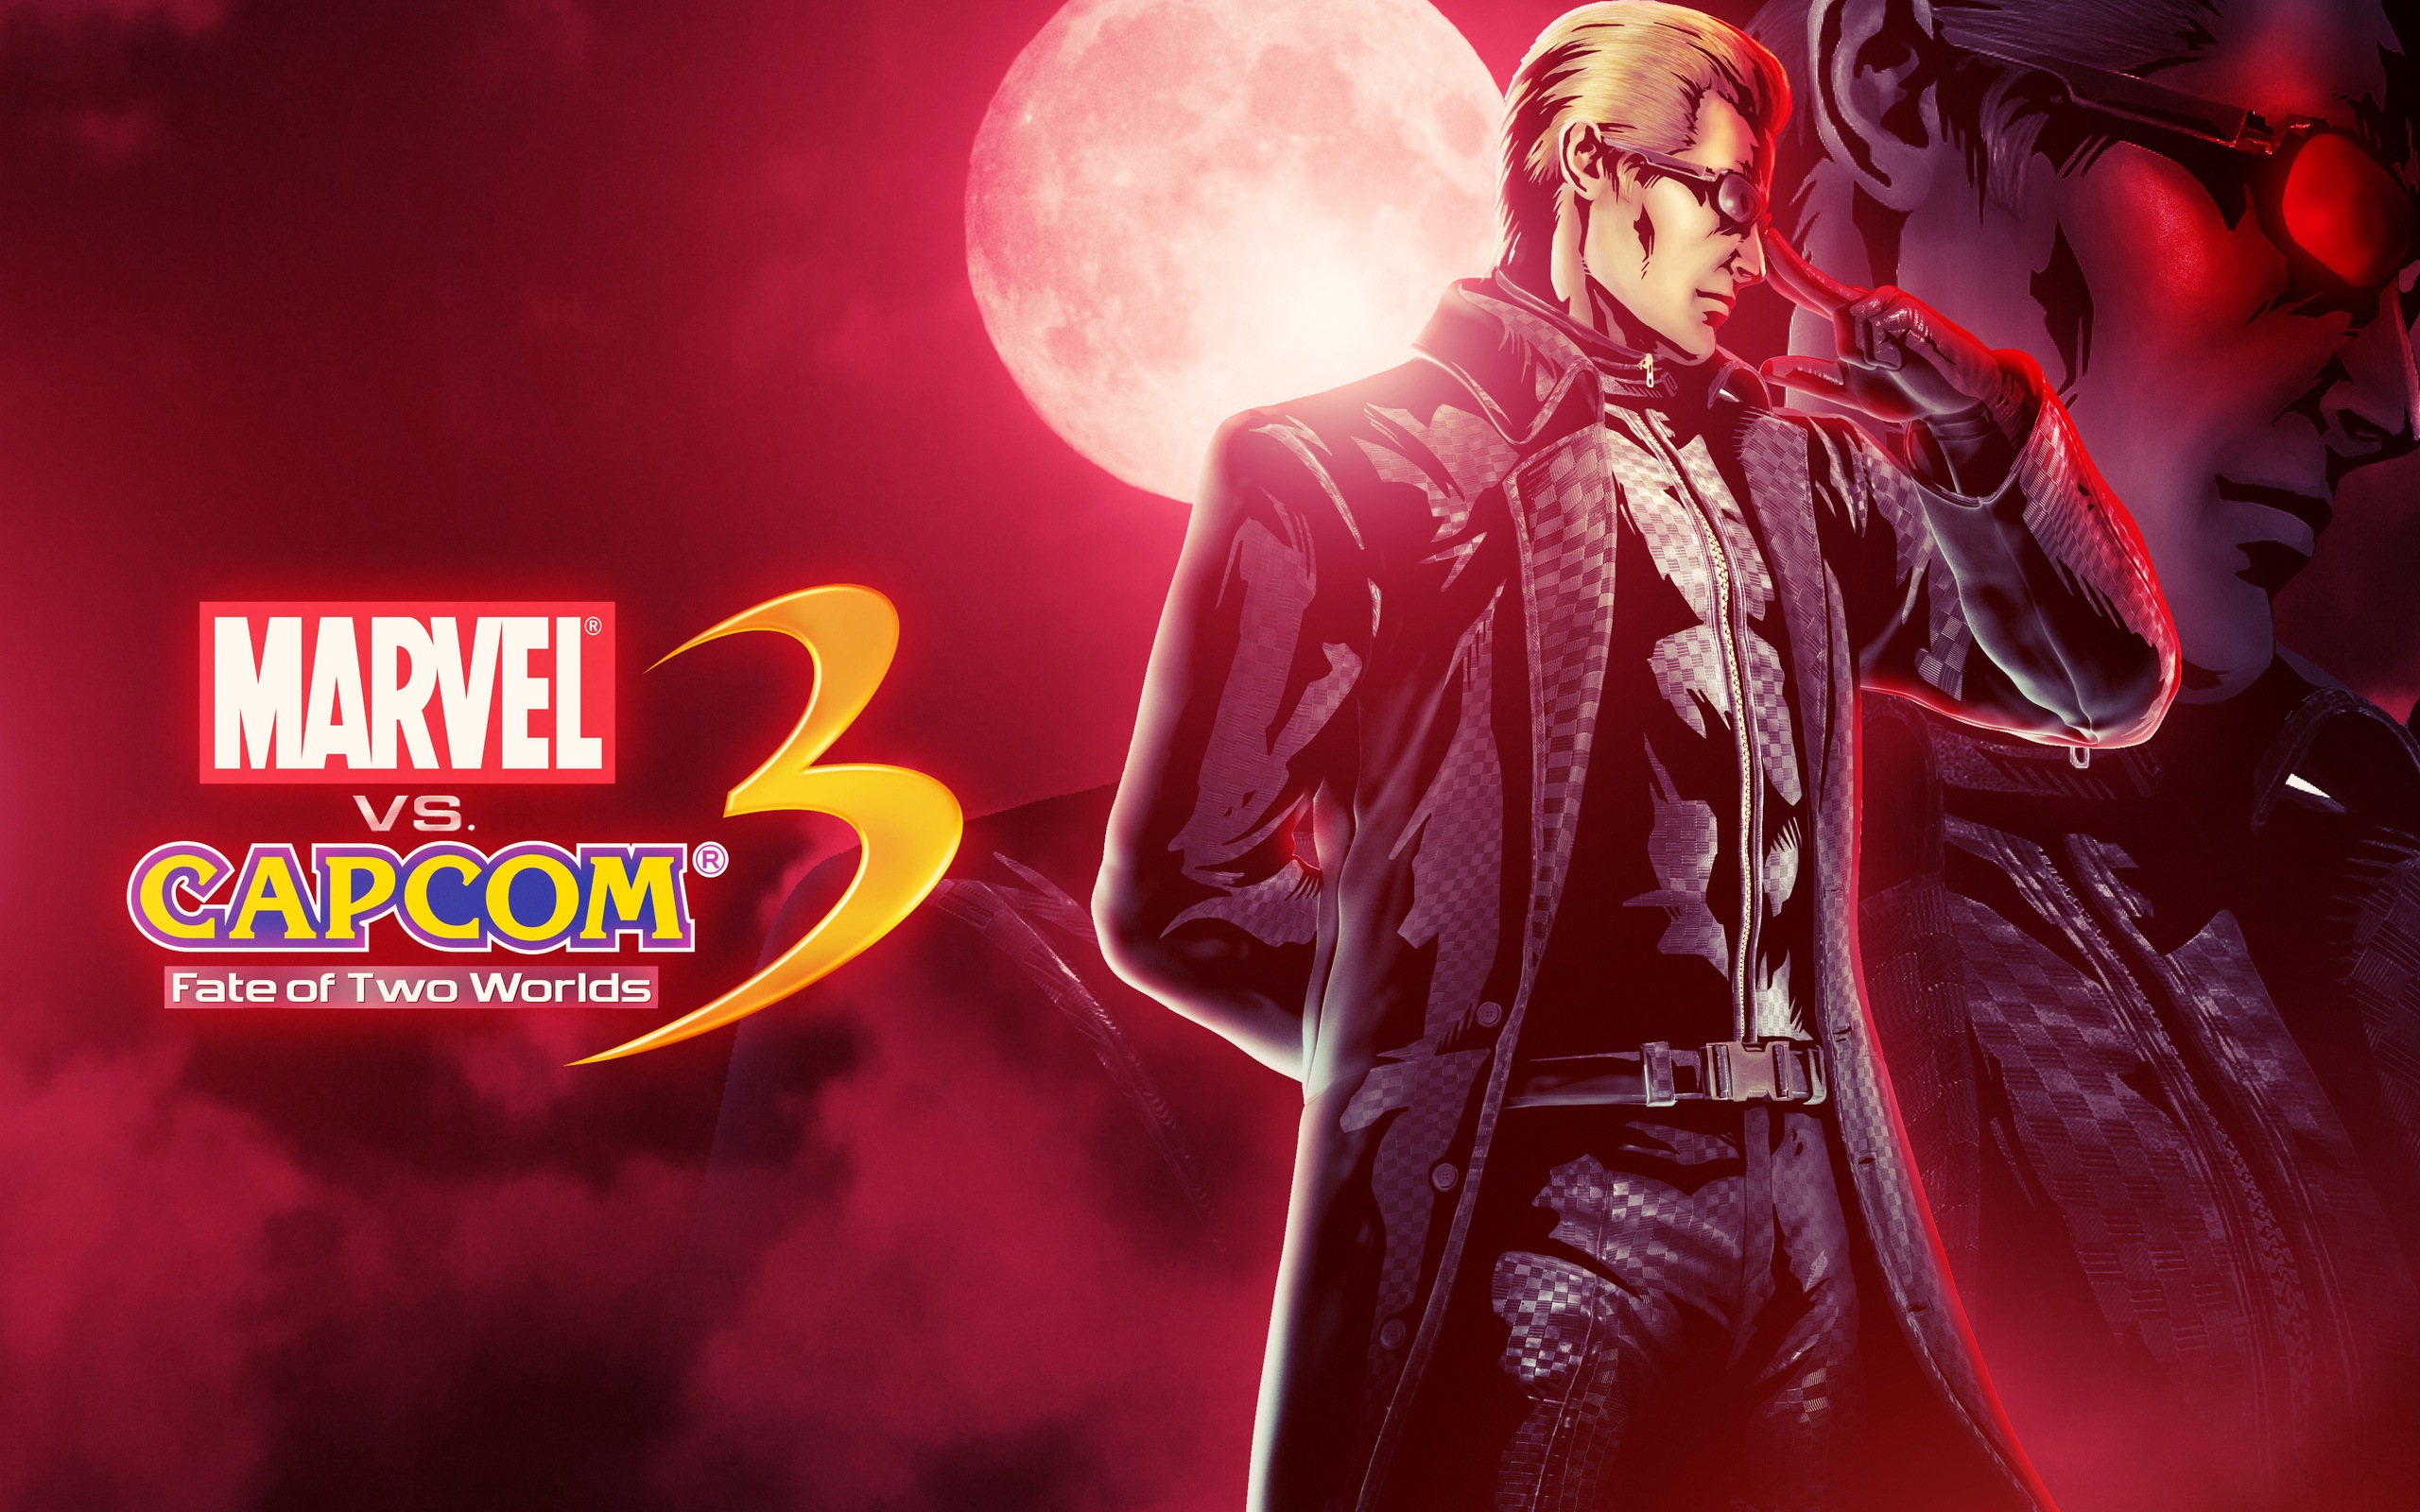 Marvel VS. Capcom 3: Fate of Two Worlds HD game wallpapers #9 - 2560x1600